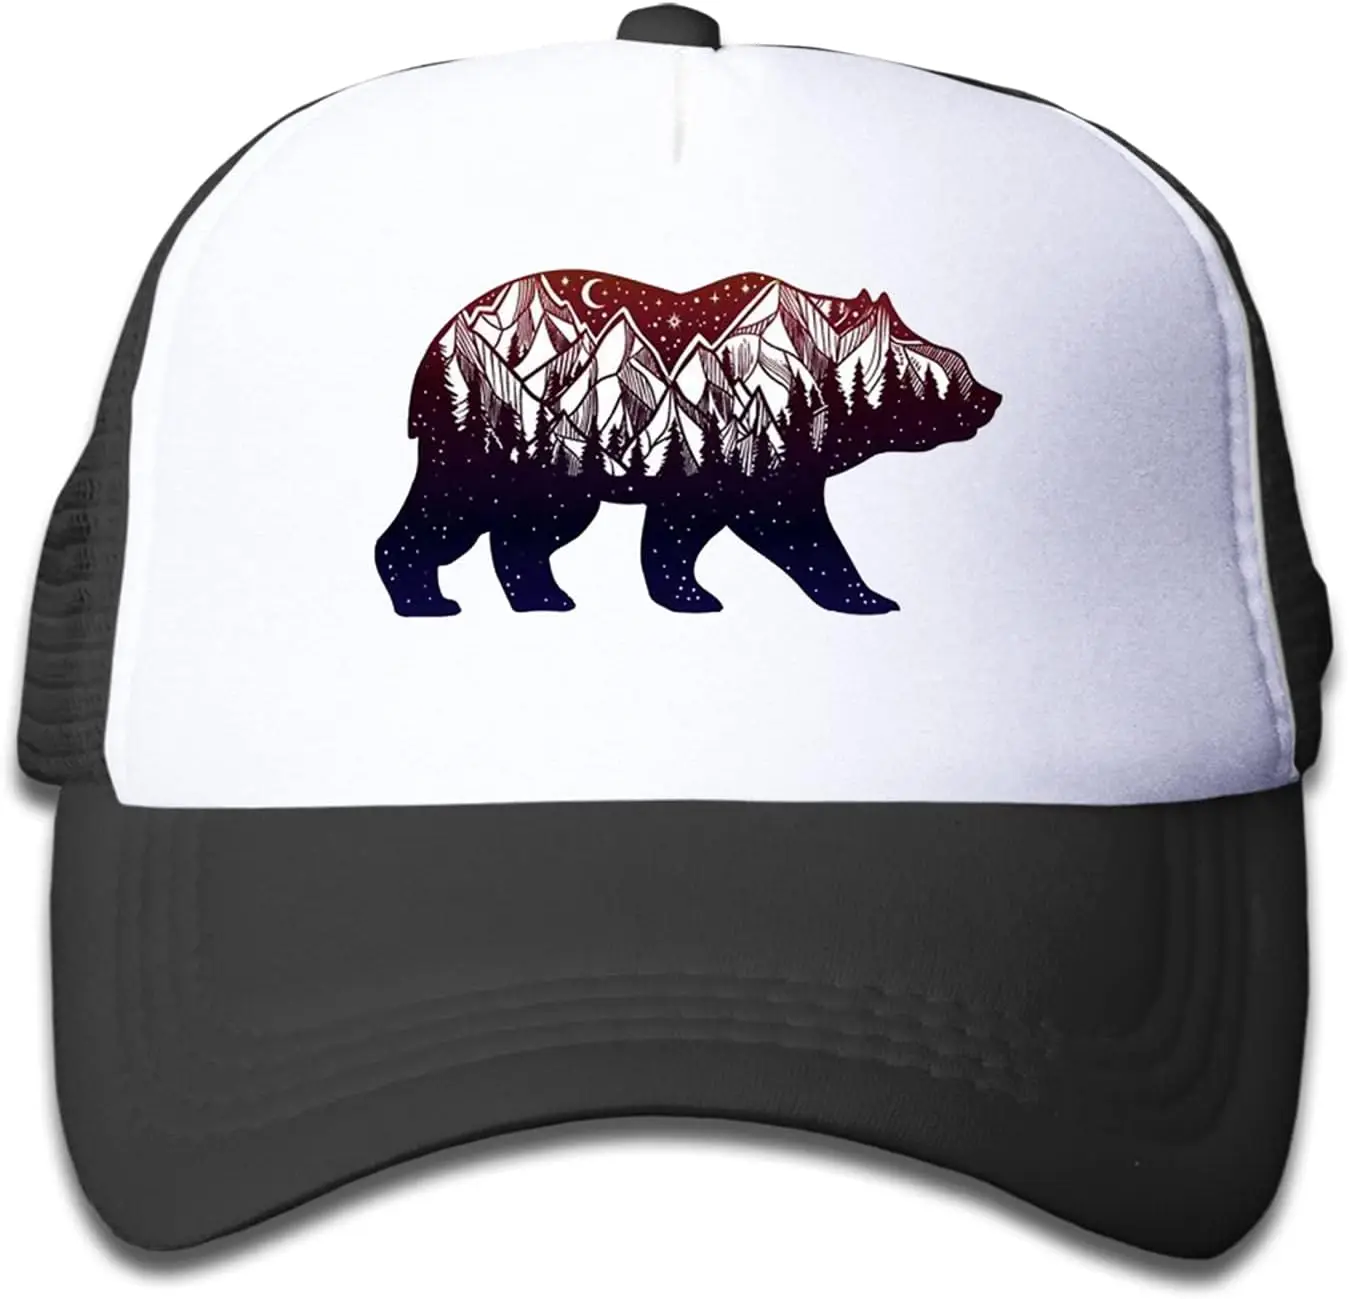 

Bear Forest Mountain Trucker Mesh Hat Adjustable Youth Toddler Baseball Cap for 3-10 Years Old Boys and Girls Kids Baseball Cap